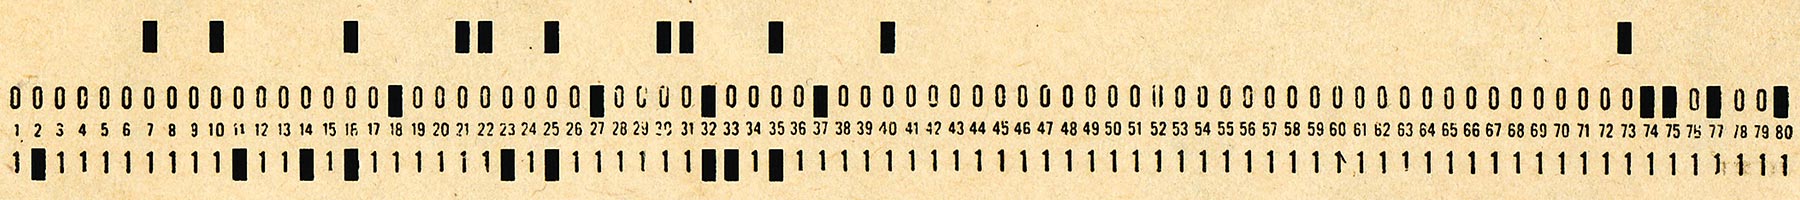 an IBM punched card